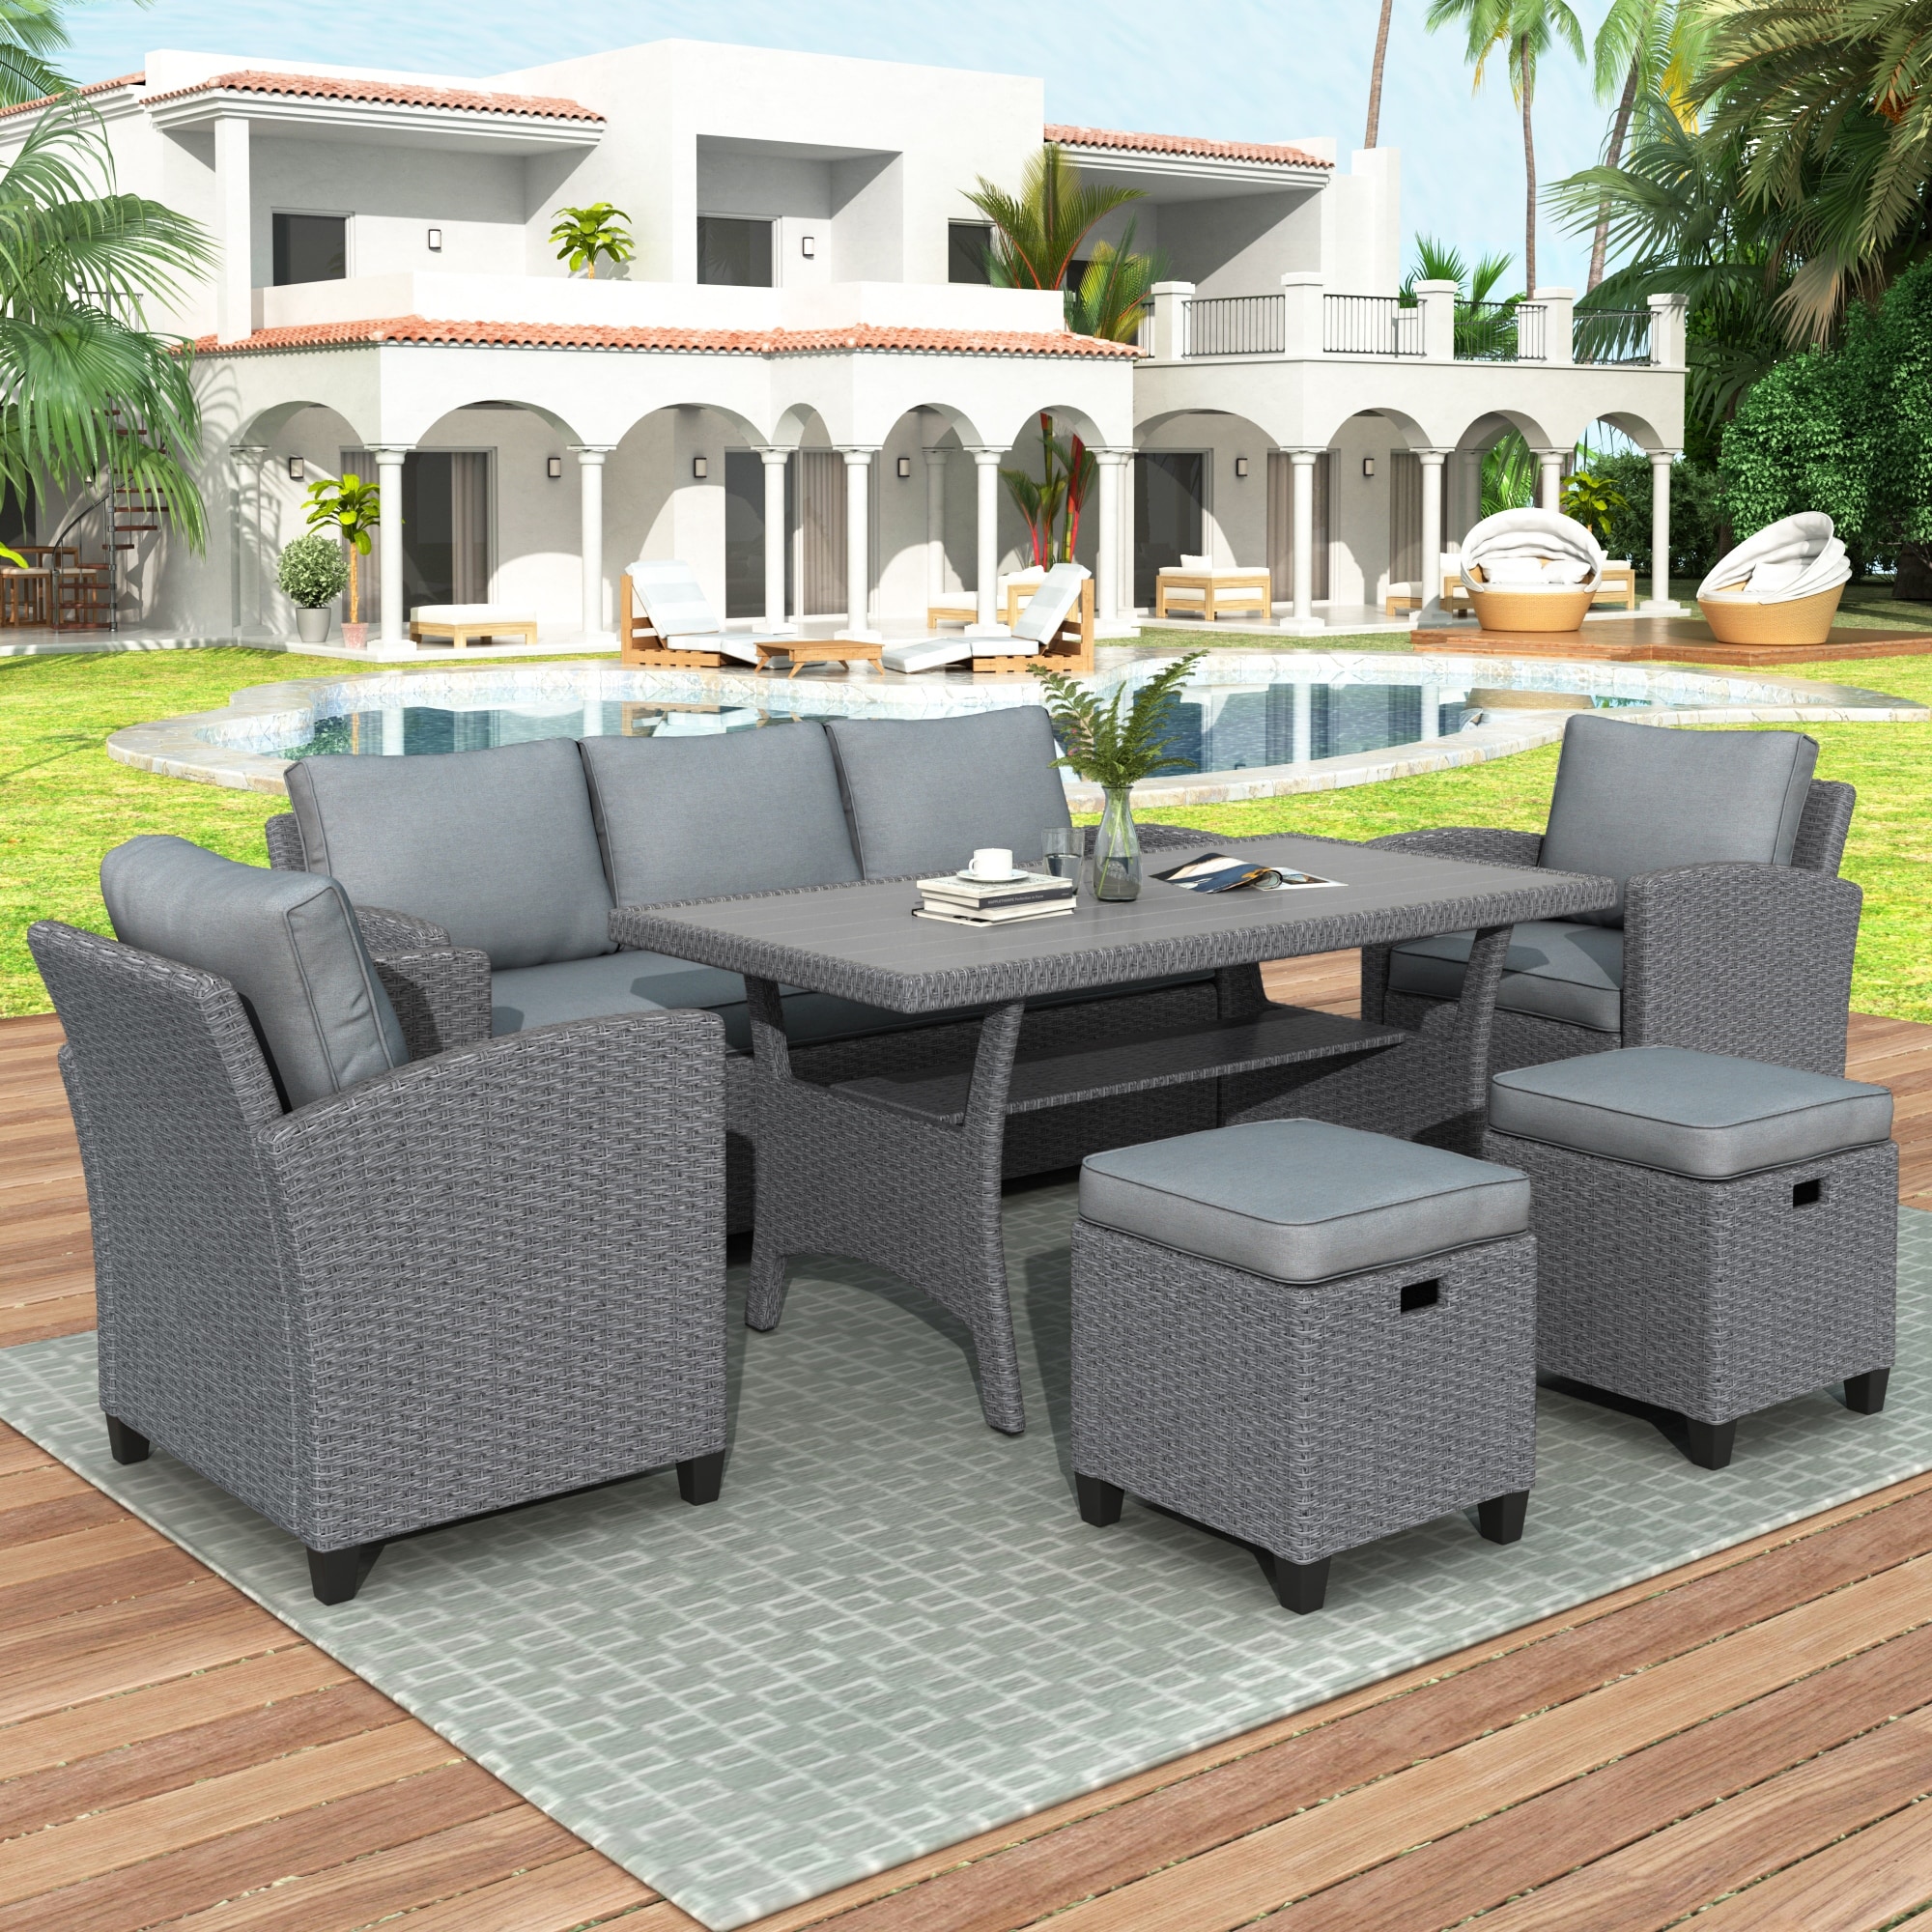 6 Piece Outdoor Rattan Wicker Sofa Set With Table  With Thick Seating And Back Cushions  Weather Resistant Pe Rattan Design